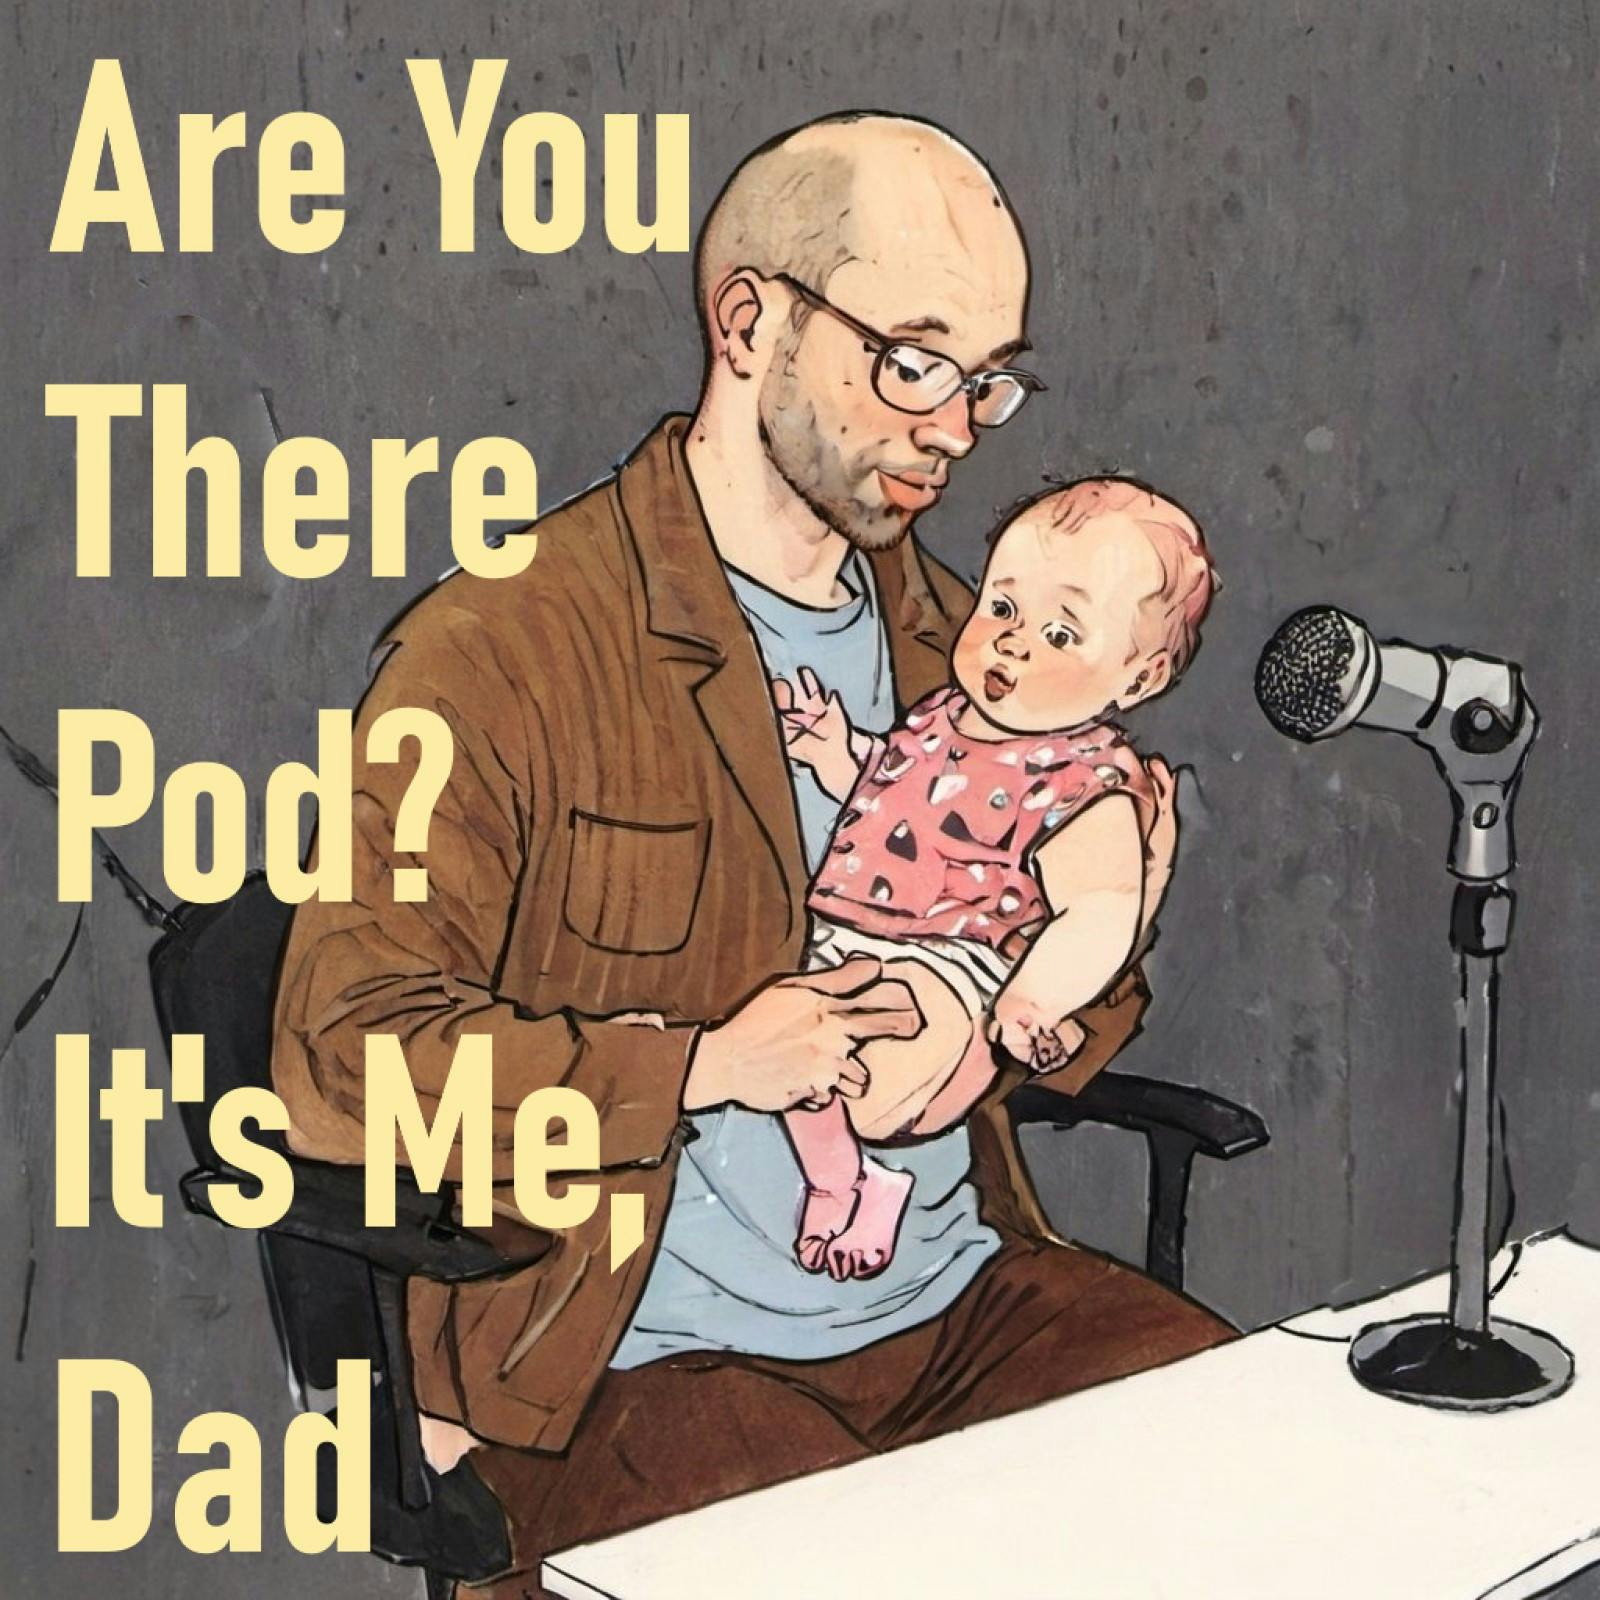 NEW SHOW: Are You There Pod? It's Me, Dad